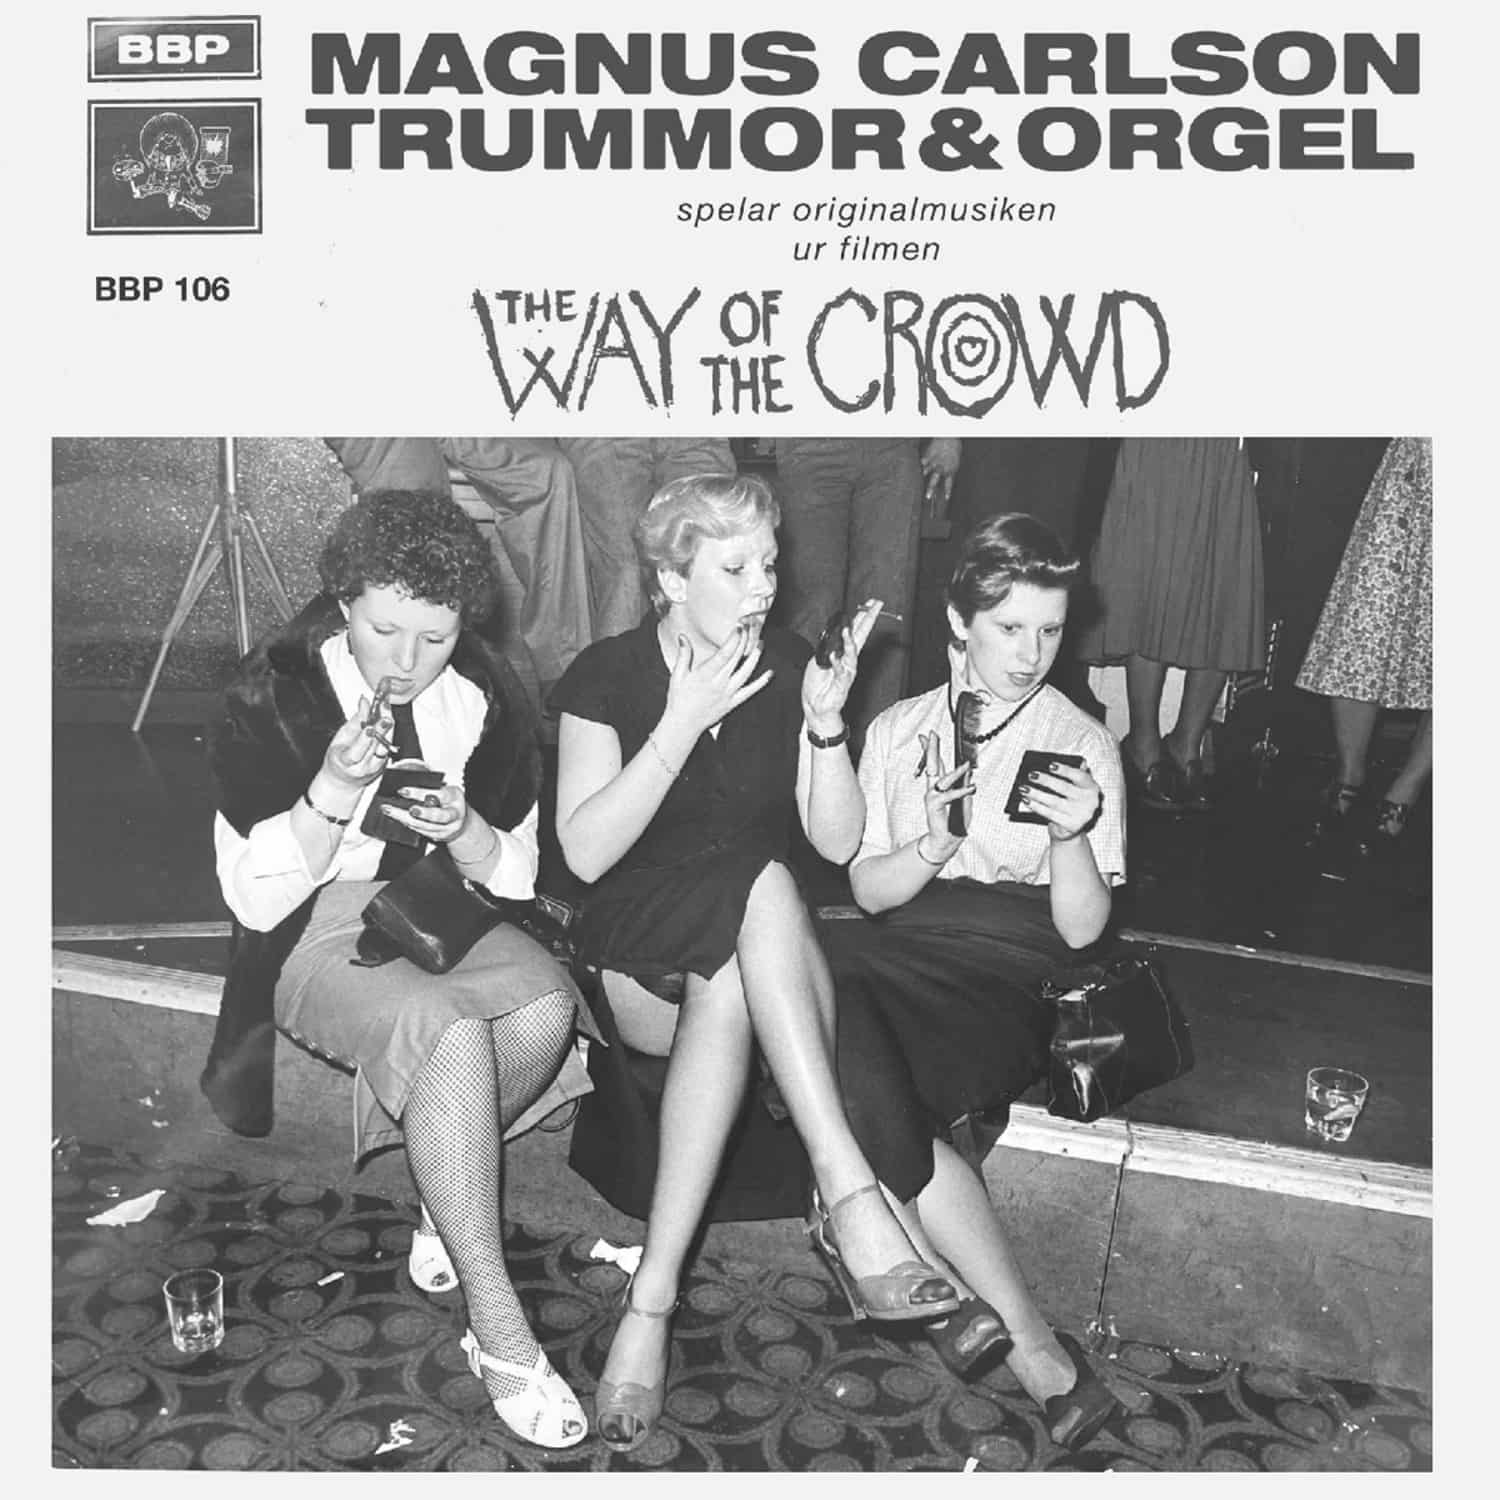  Magnus Carlson - WAY OF THE CROWD EP